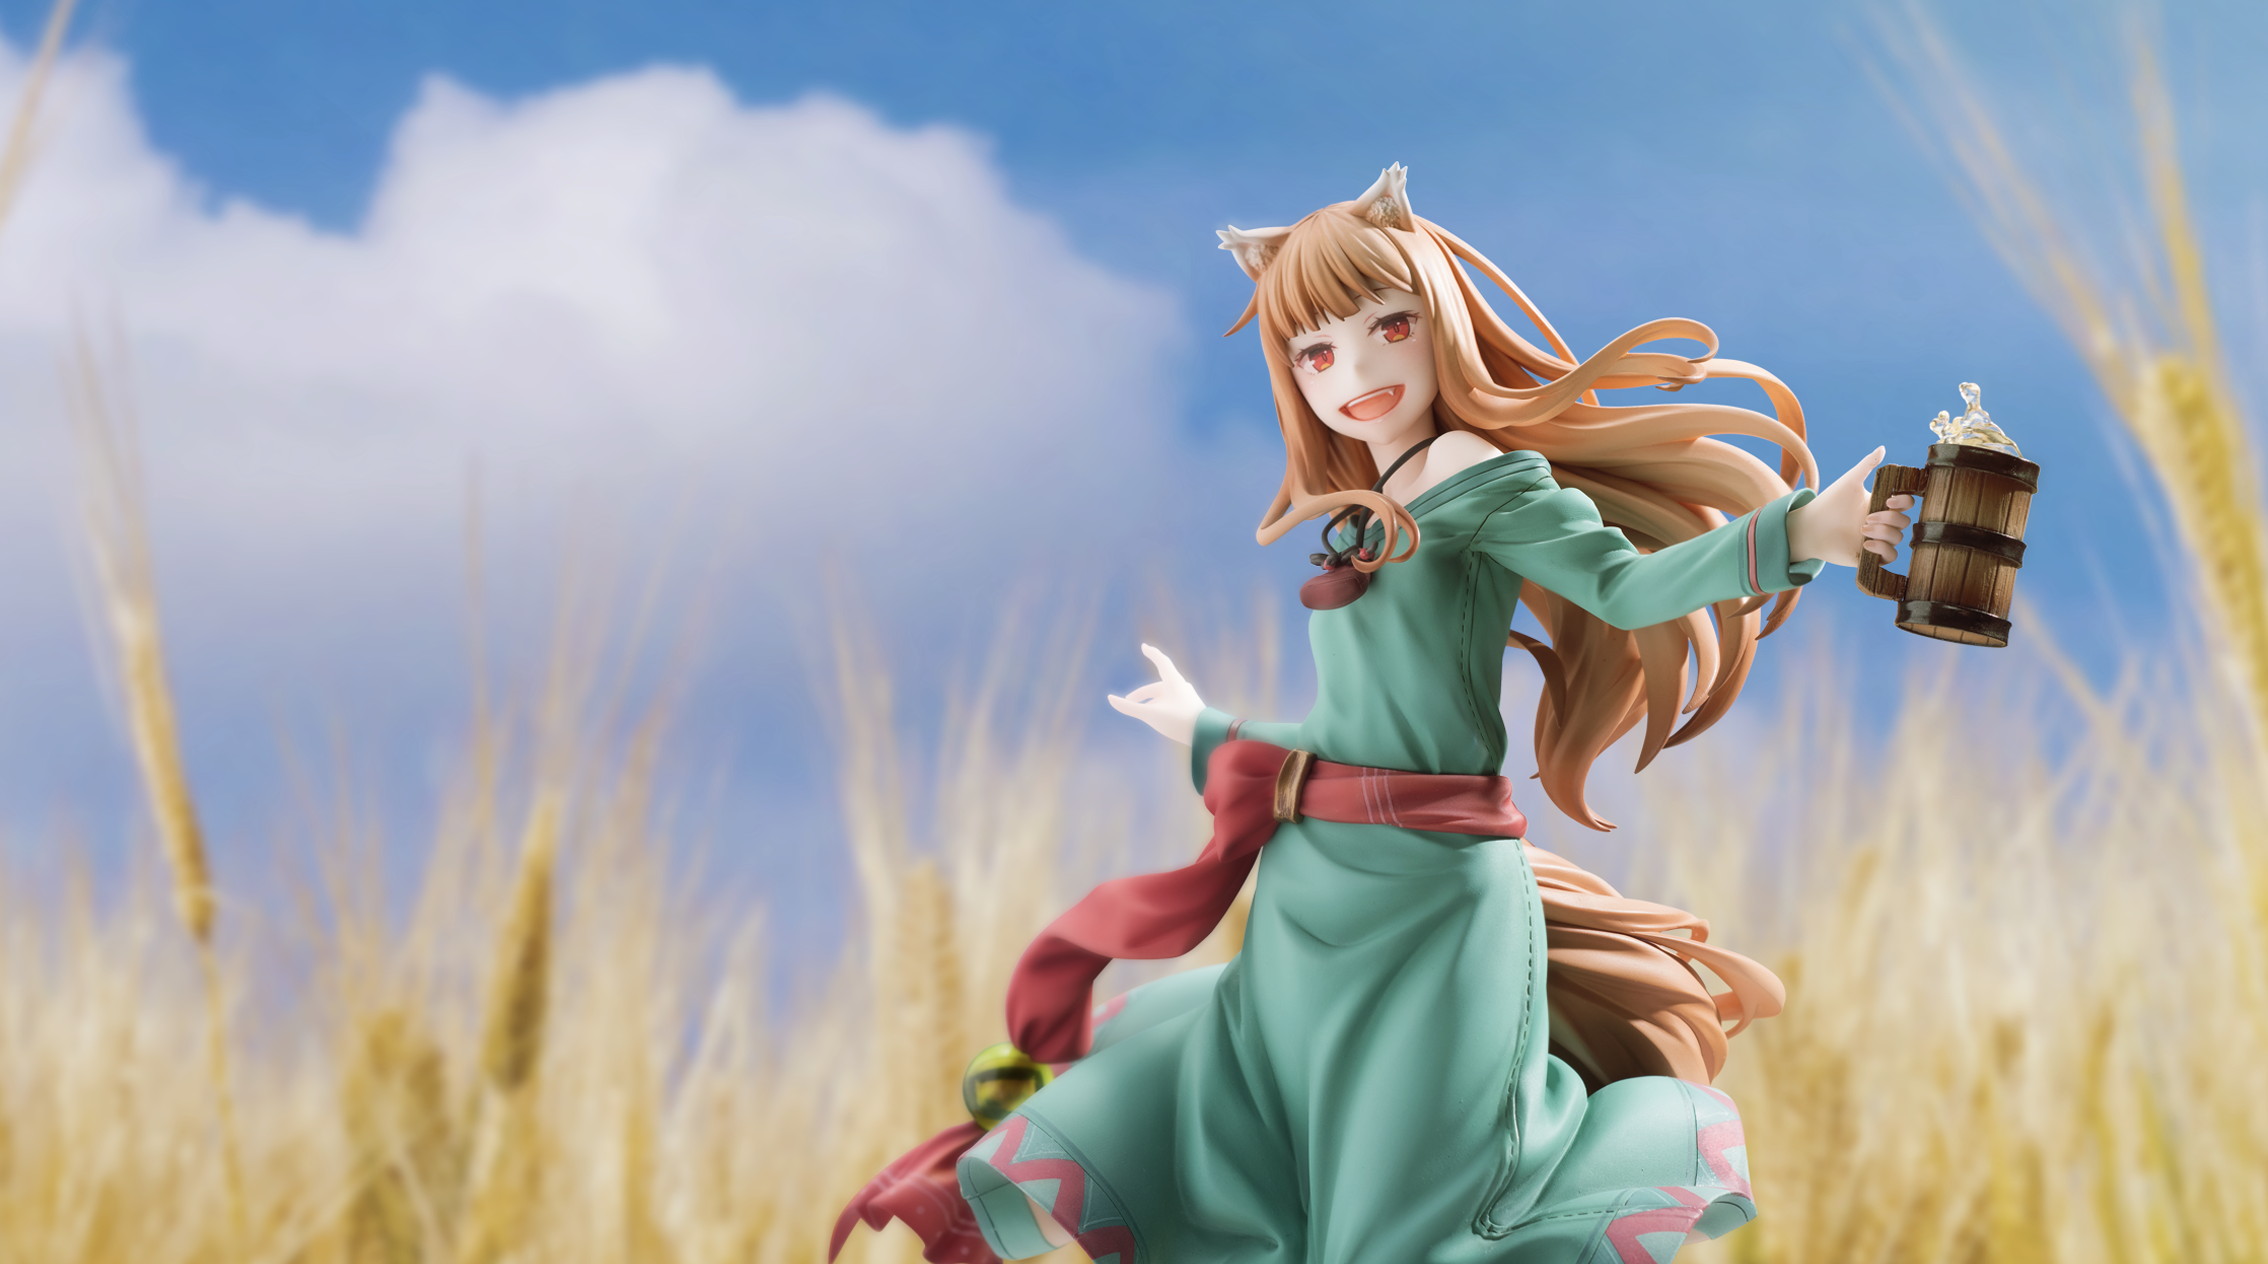 spice-and-wolf-holo-18-scale-figure-10th-anniversary-ver-re-run image count 9